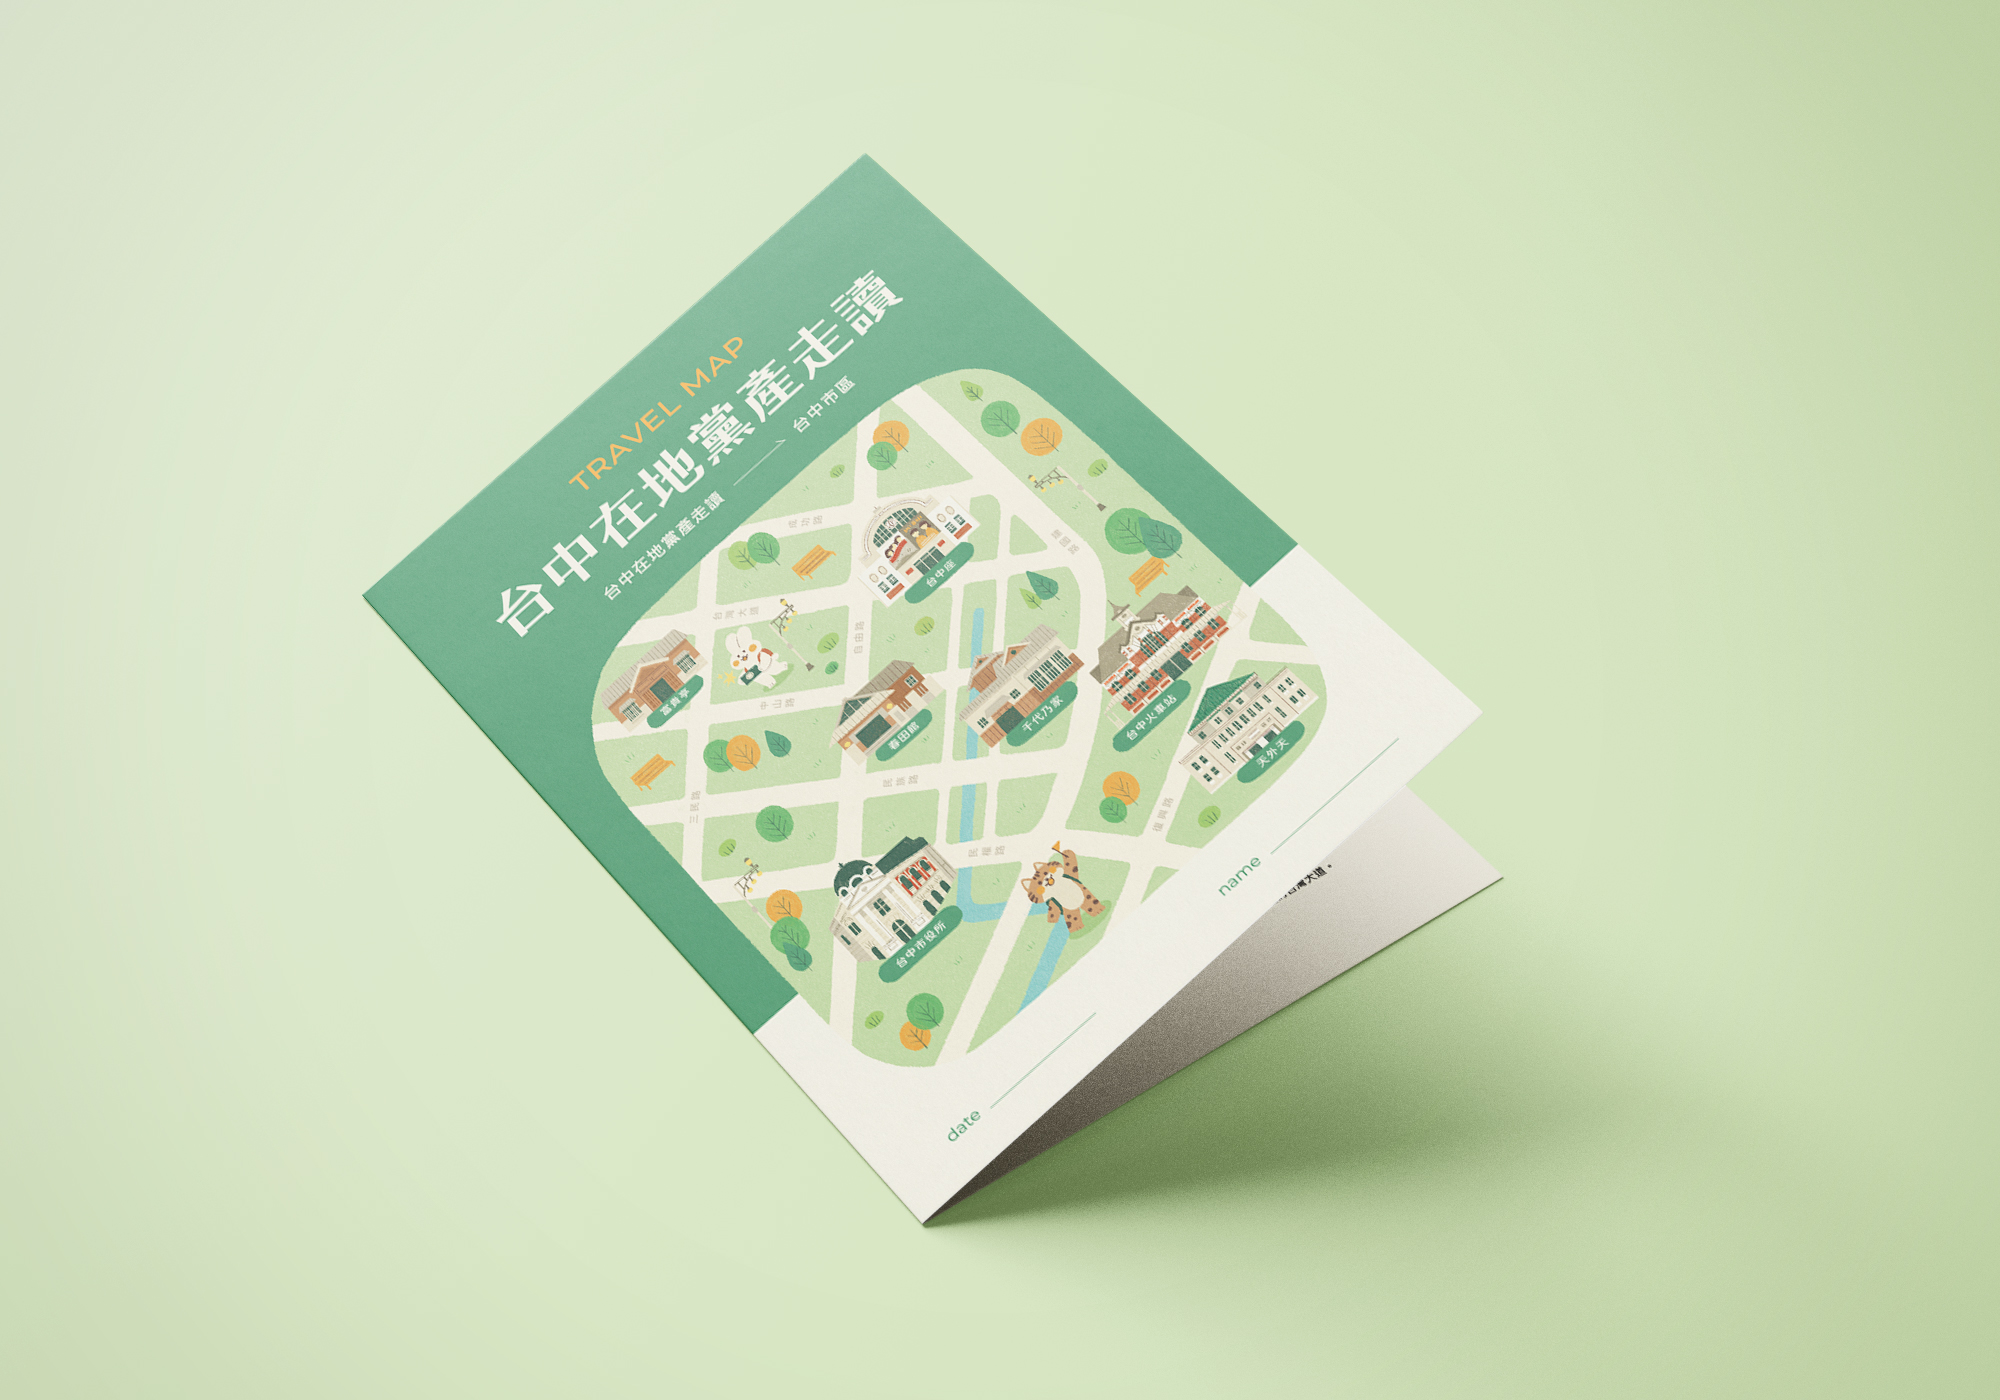 Taichung Local Travel Map Illustration 台中 建築 地圖插畫設計 design by Jiaan 莊嘉安